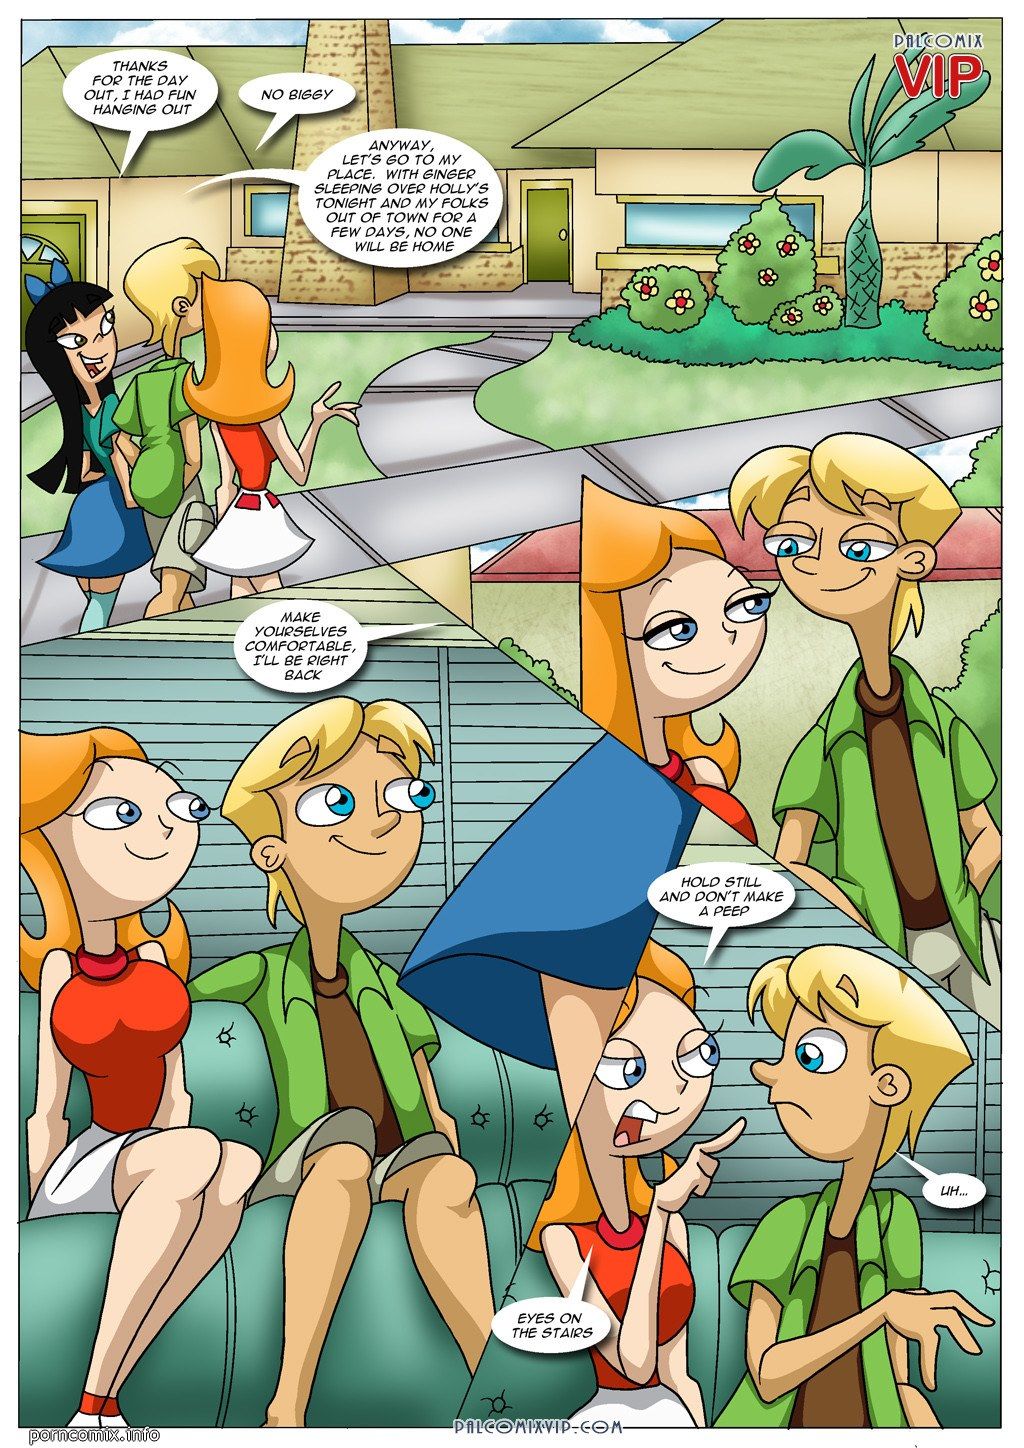 Pal Comix - Phineas And Ferb - Helping Out a Friend page 8